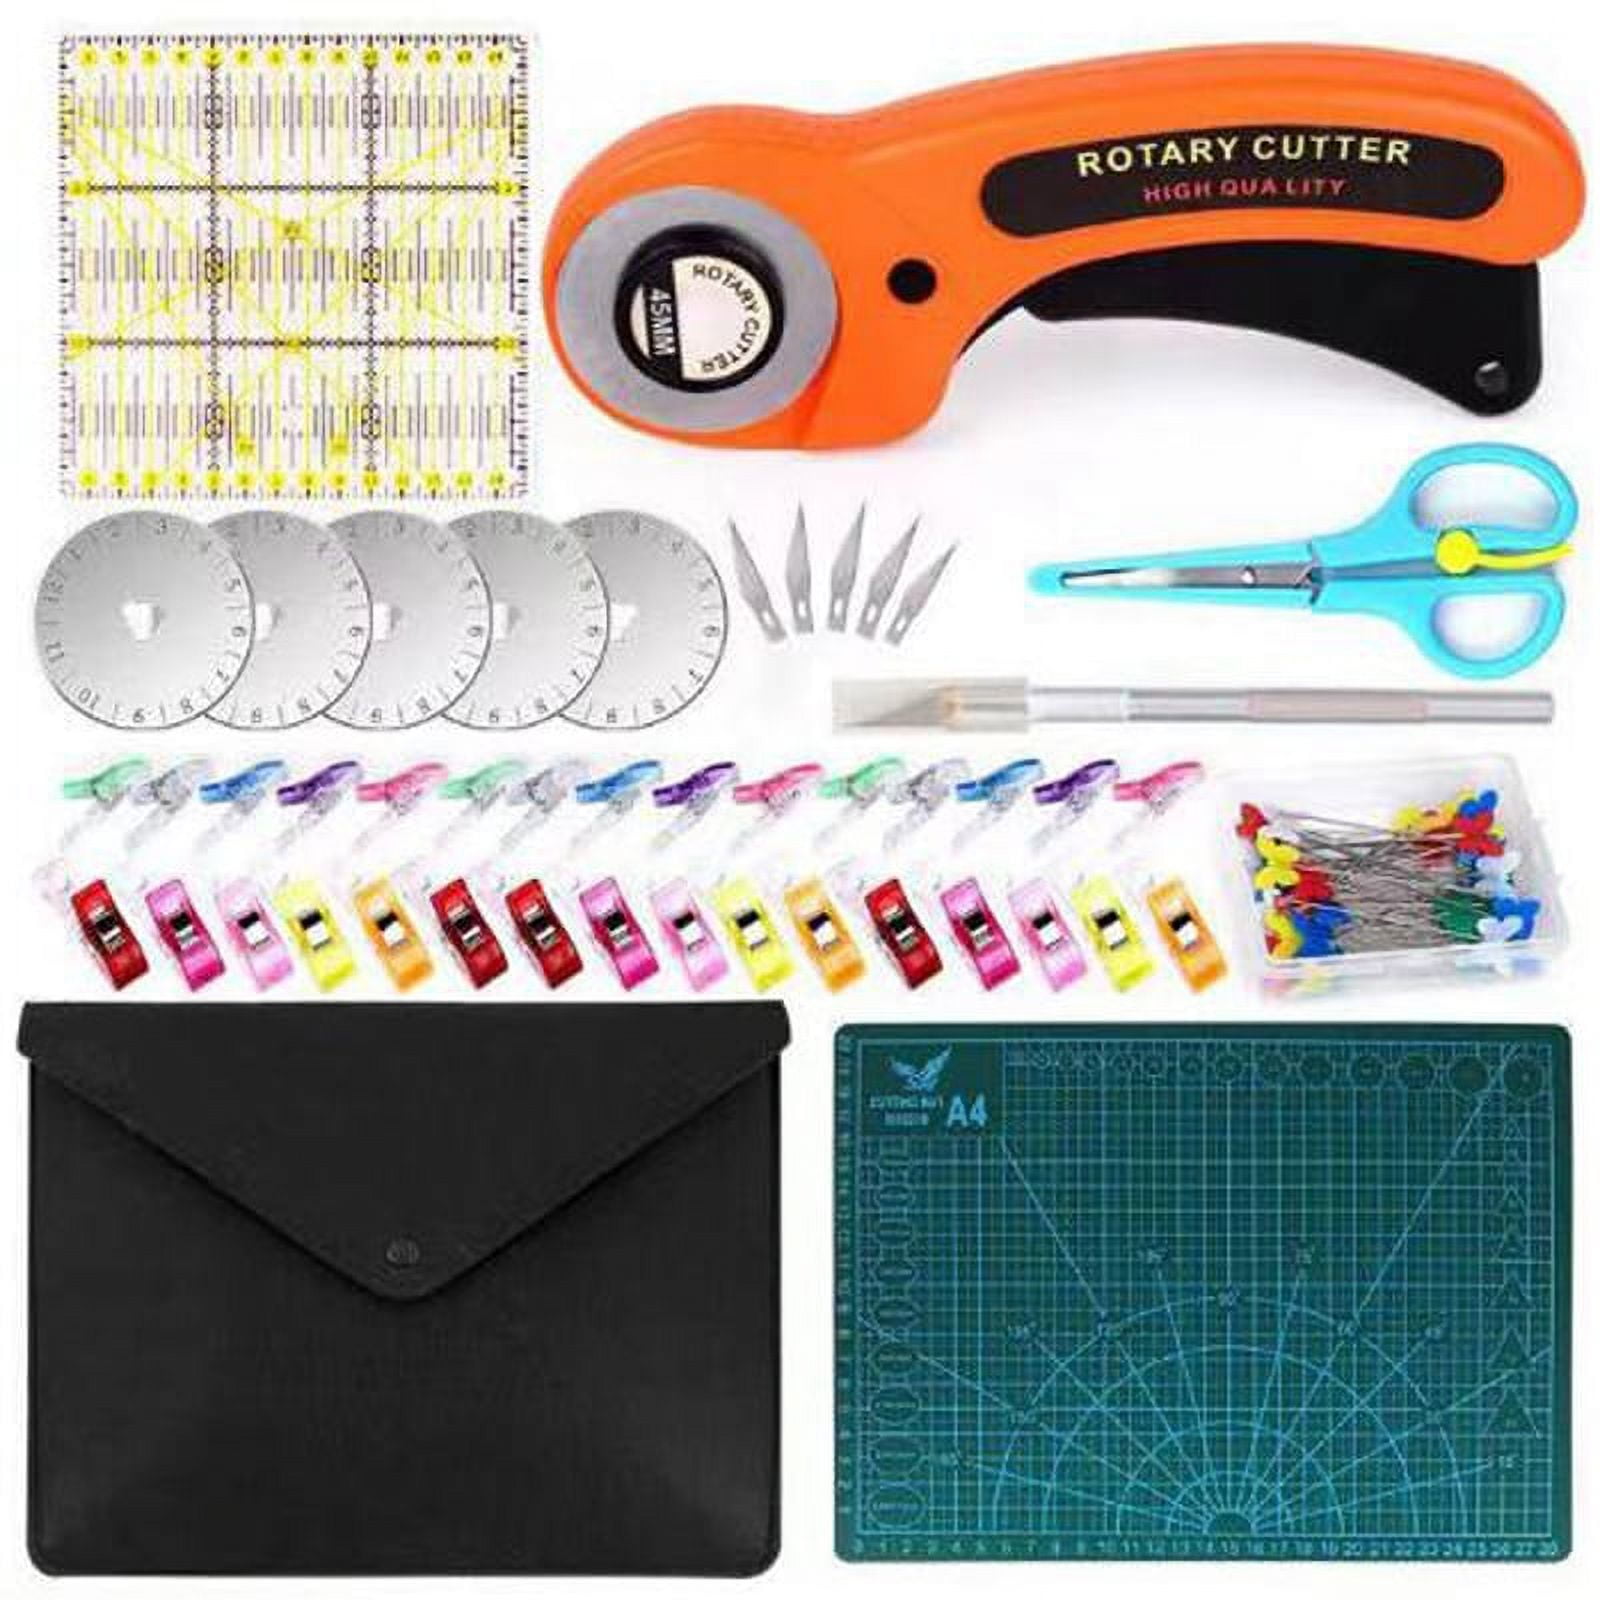 Wa Portman Rotary Cutter Set & Cutting Mat for Sewing - 45mm Rotary Cutter for Fabric & 5 Blades - 24x36 in Fabric Cutting Mat - 6x24 in Acrylic